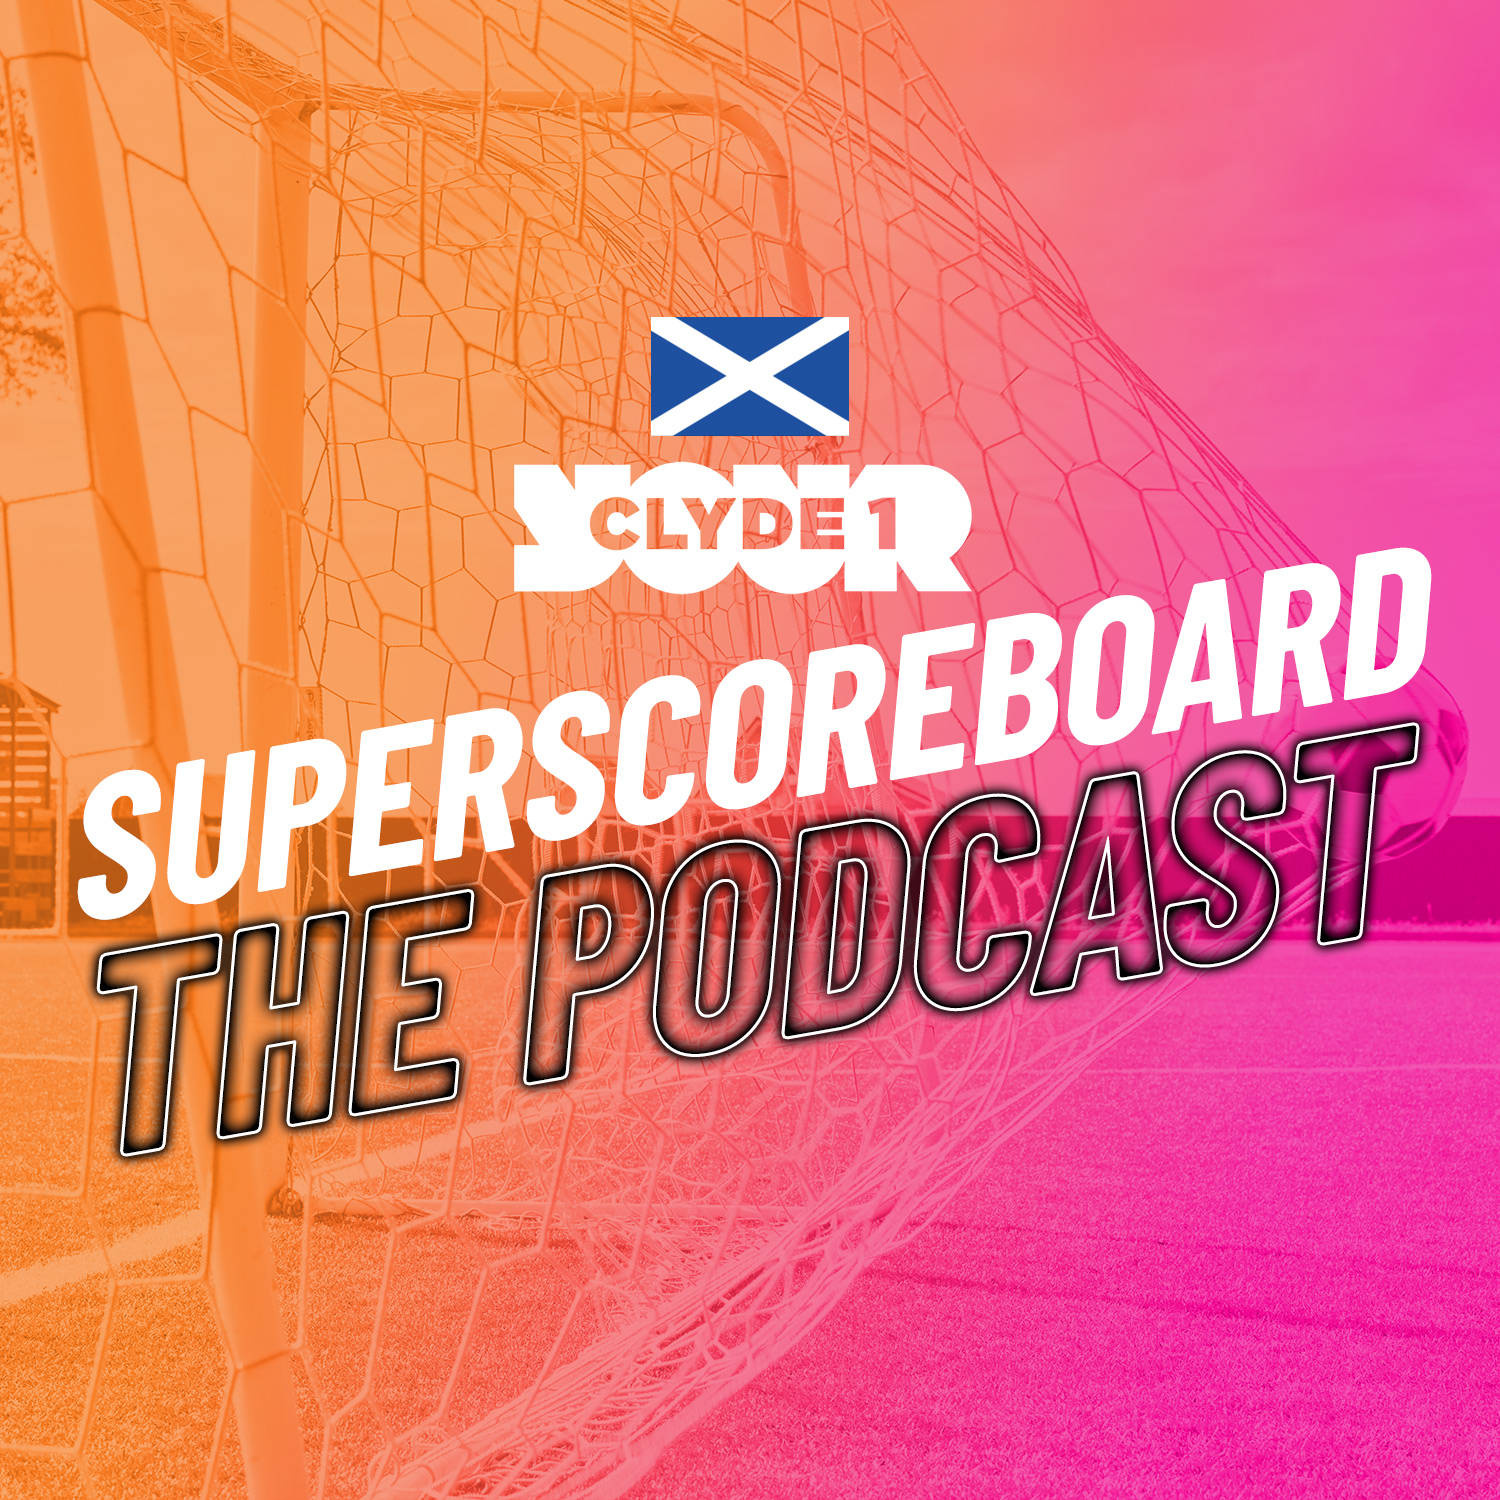 Monday 29th January Clyde 1 Superscoreboard